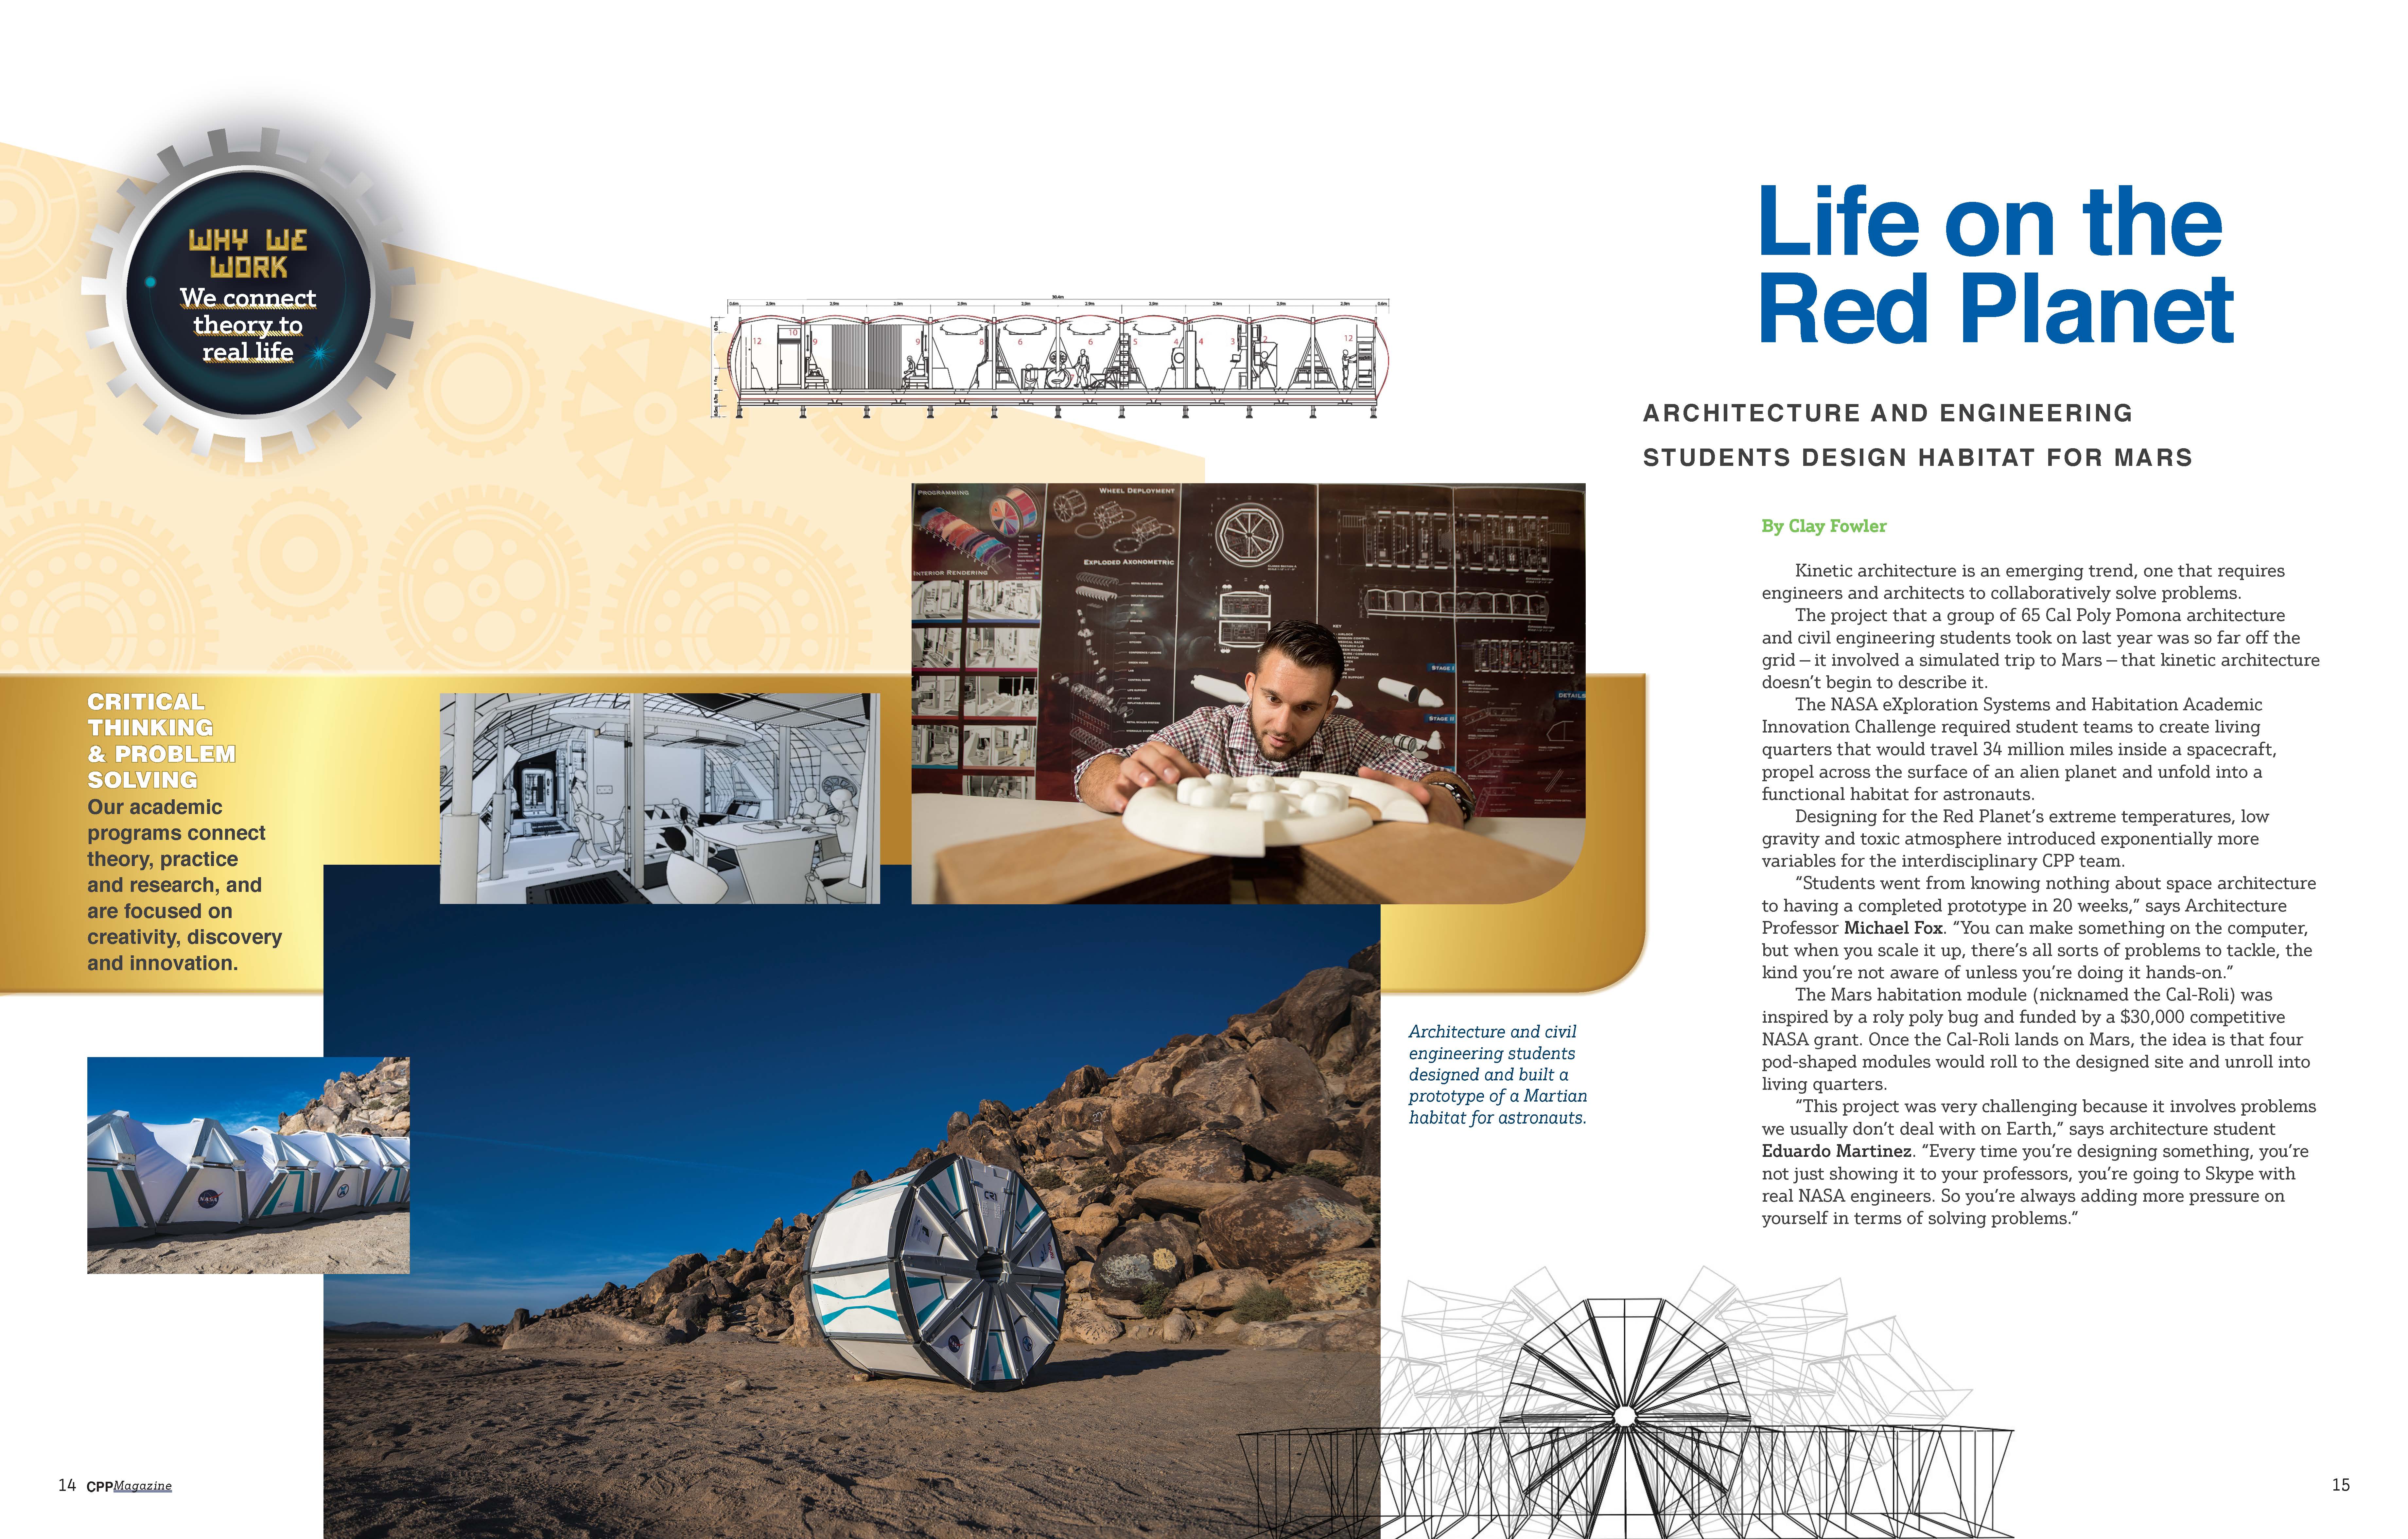 19spring-cpp-mag-life-on-the-red-planet.jpg